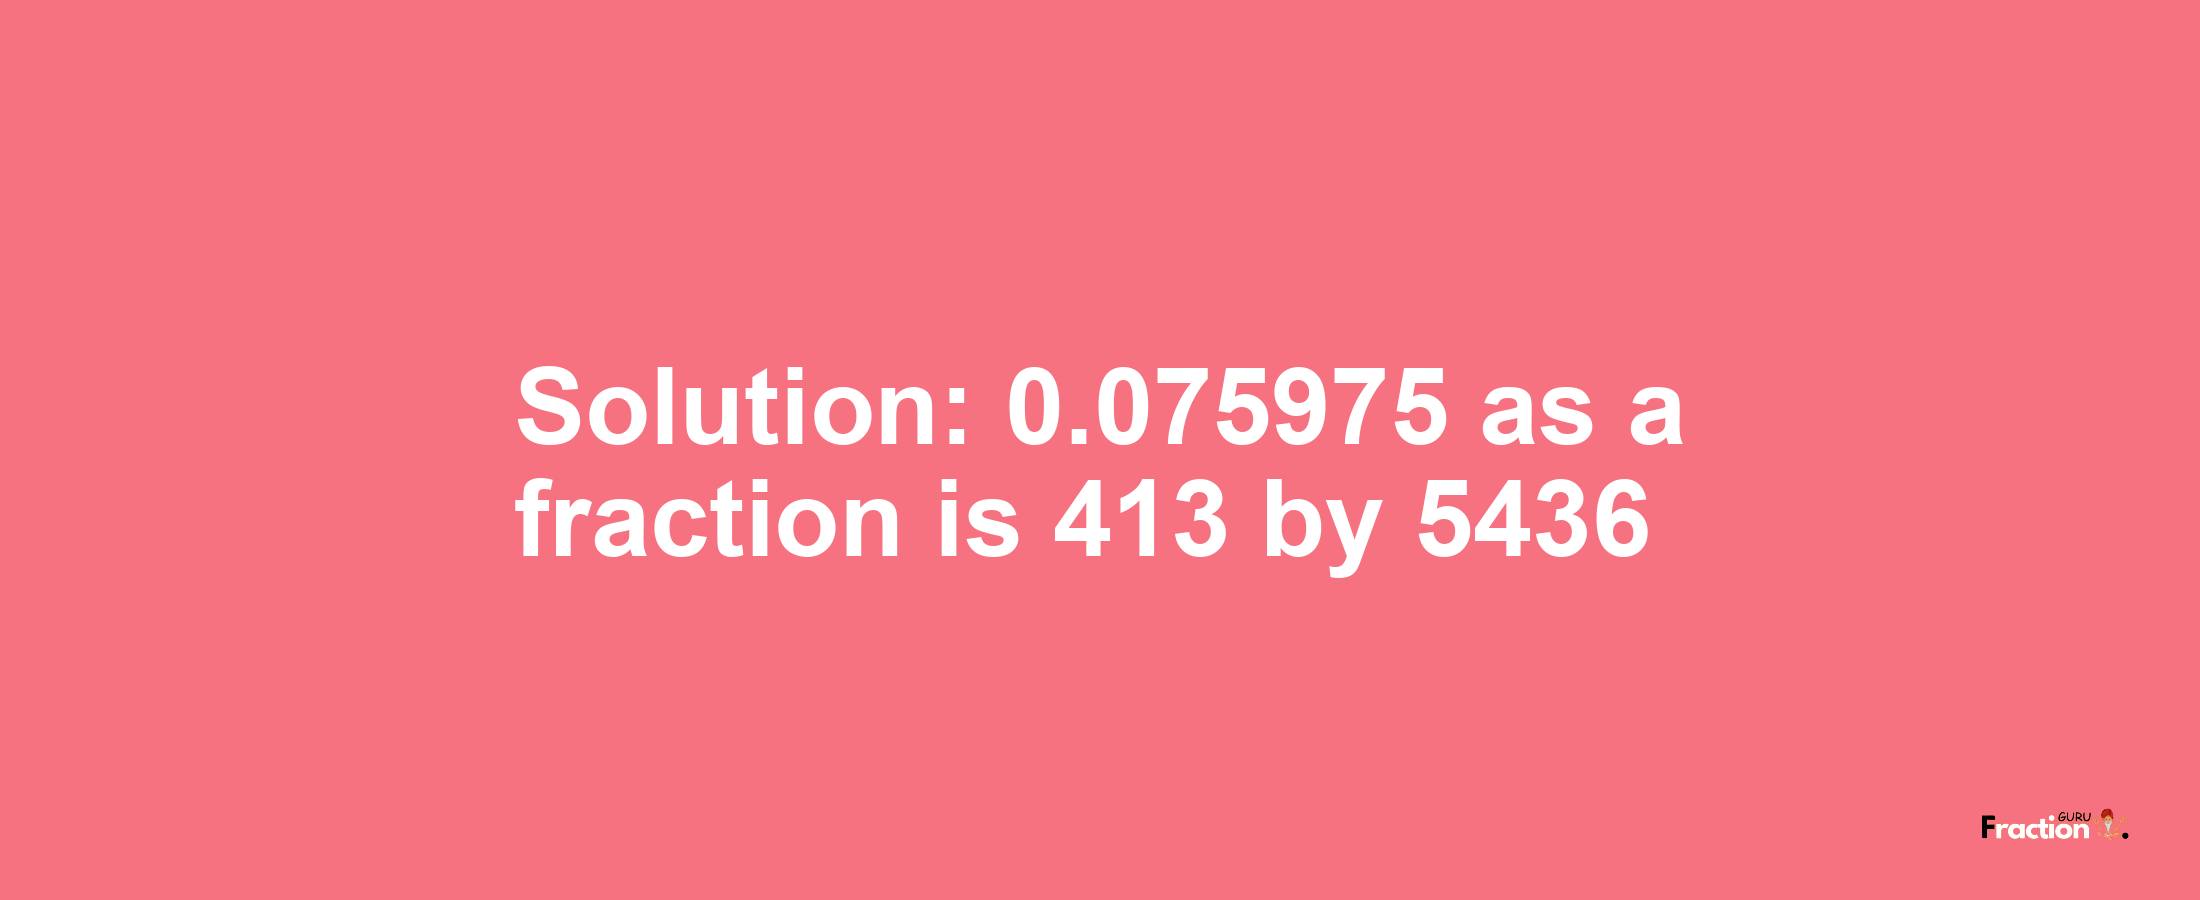 Solution:0.075975 as a fraction is 413/5436